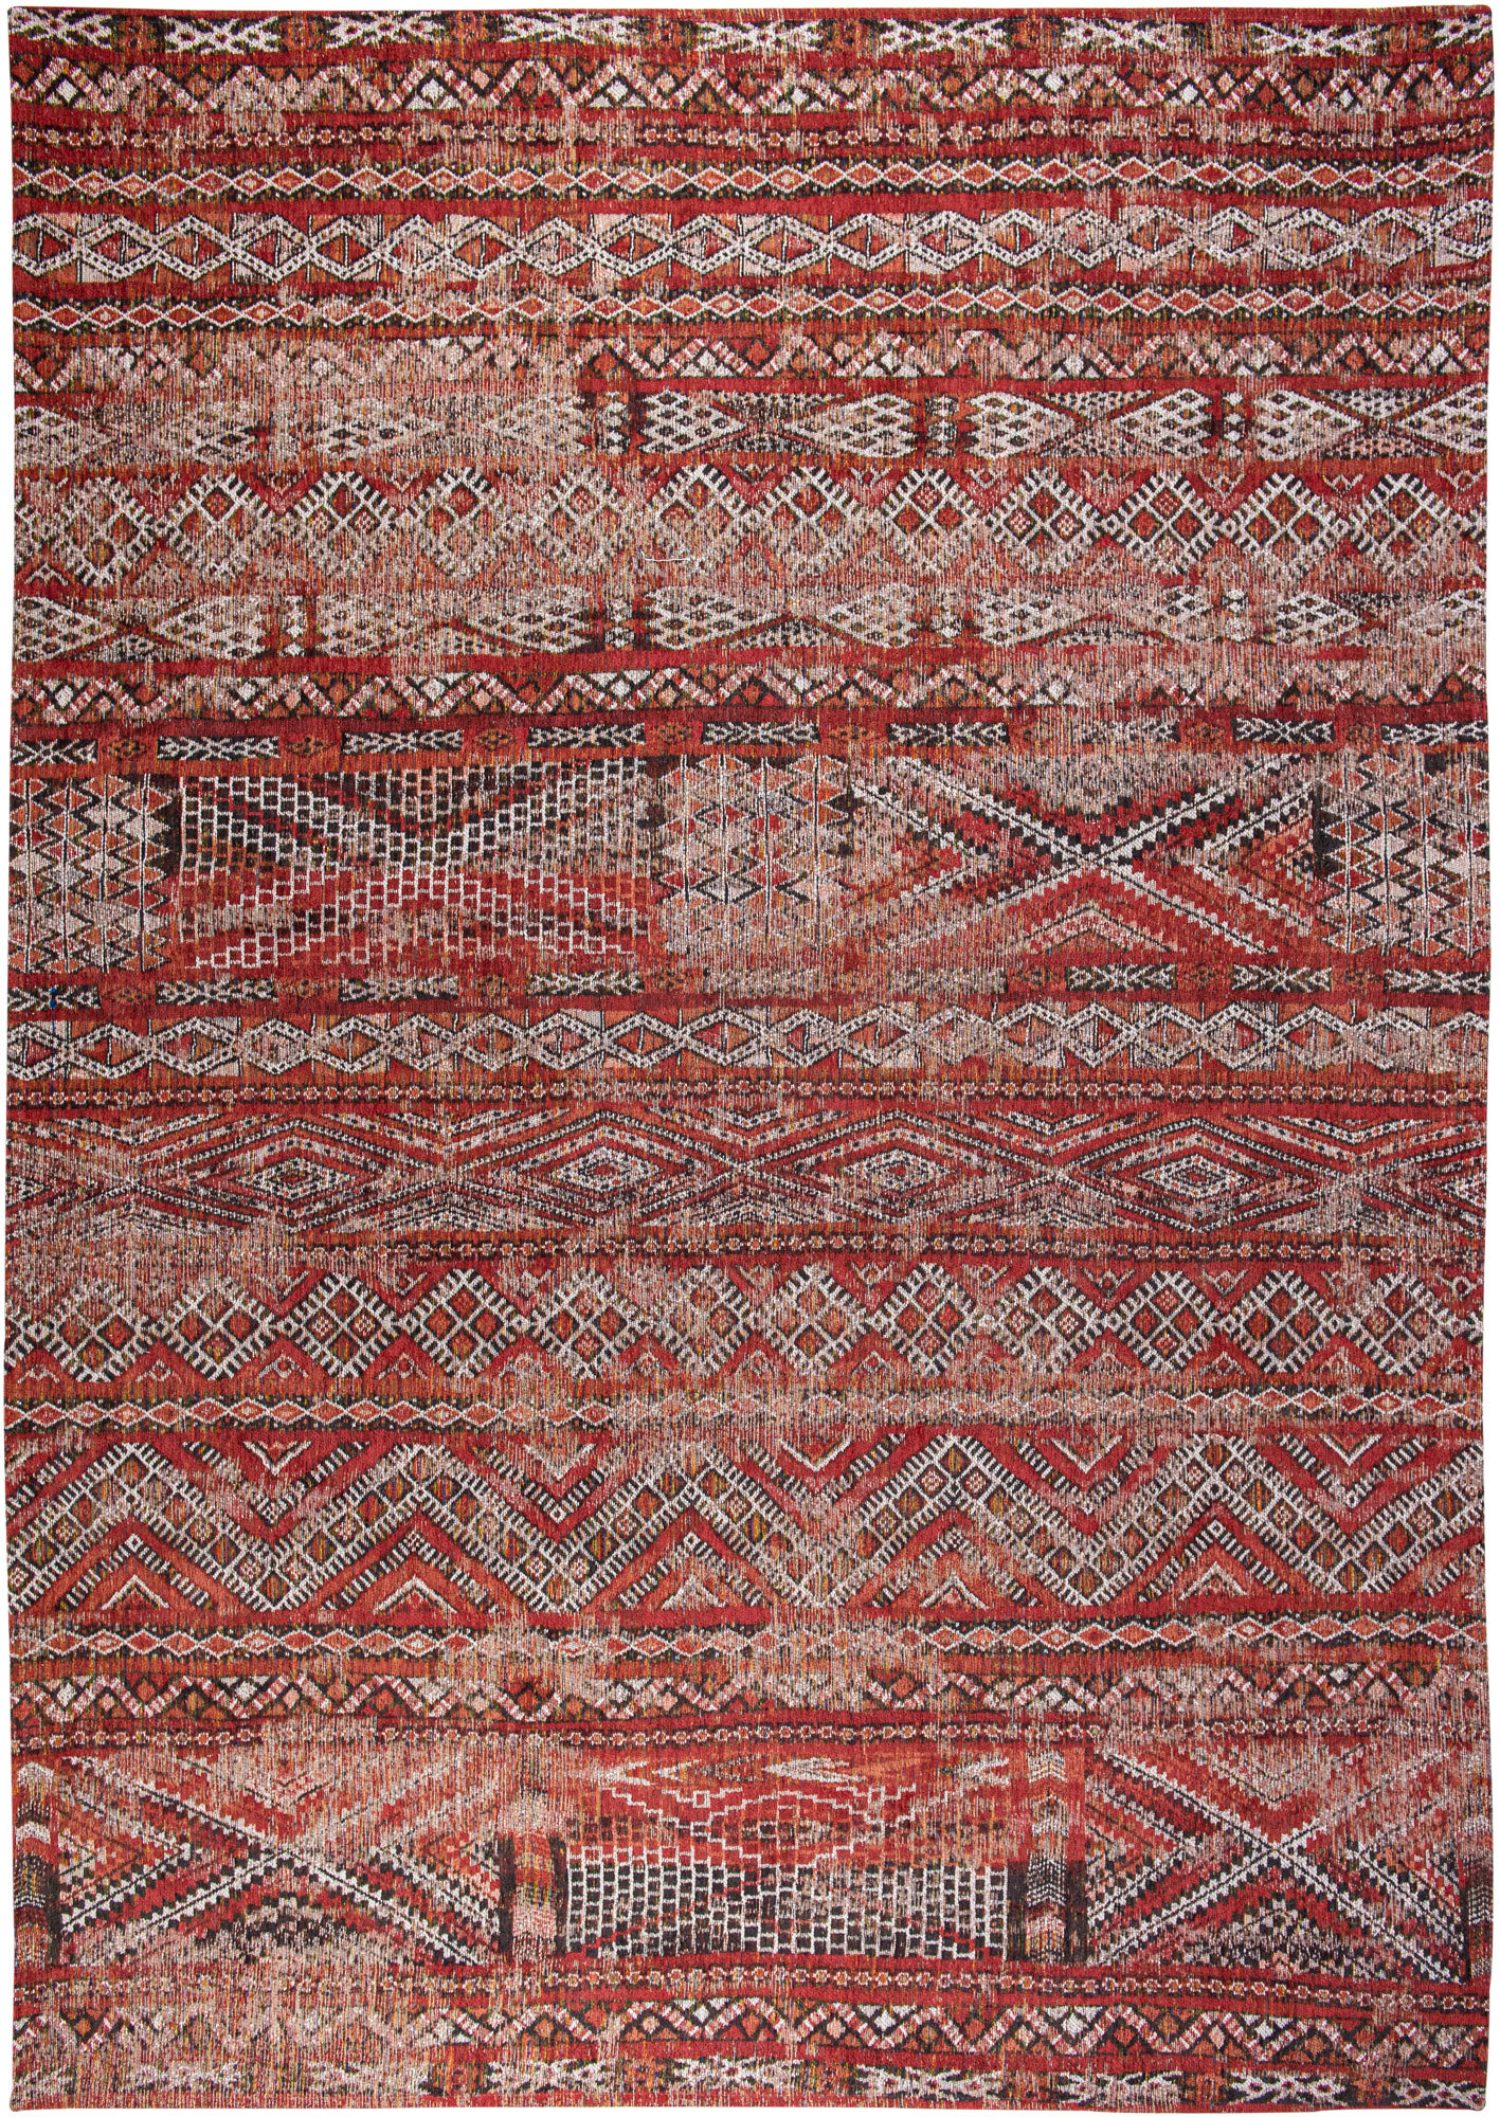 A classic Moroccan nomad pattern